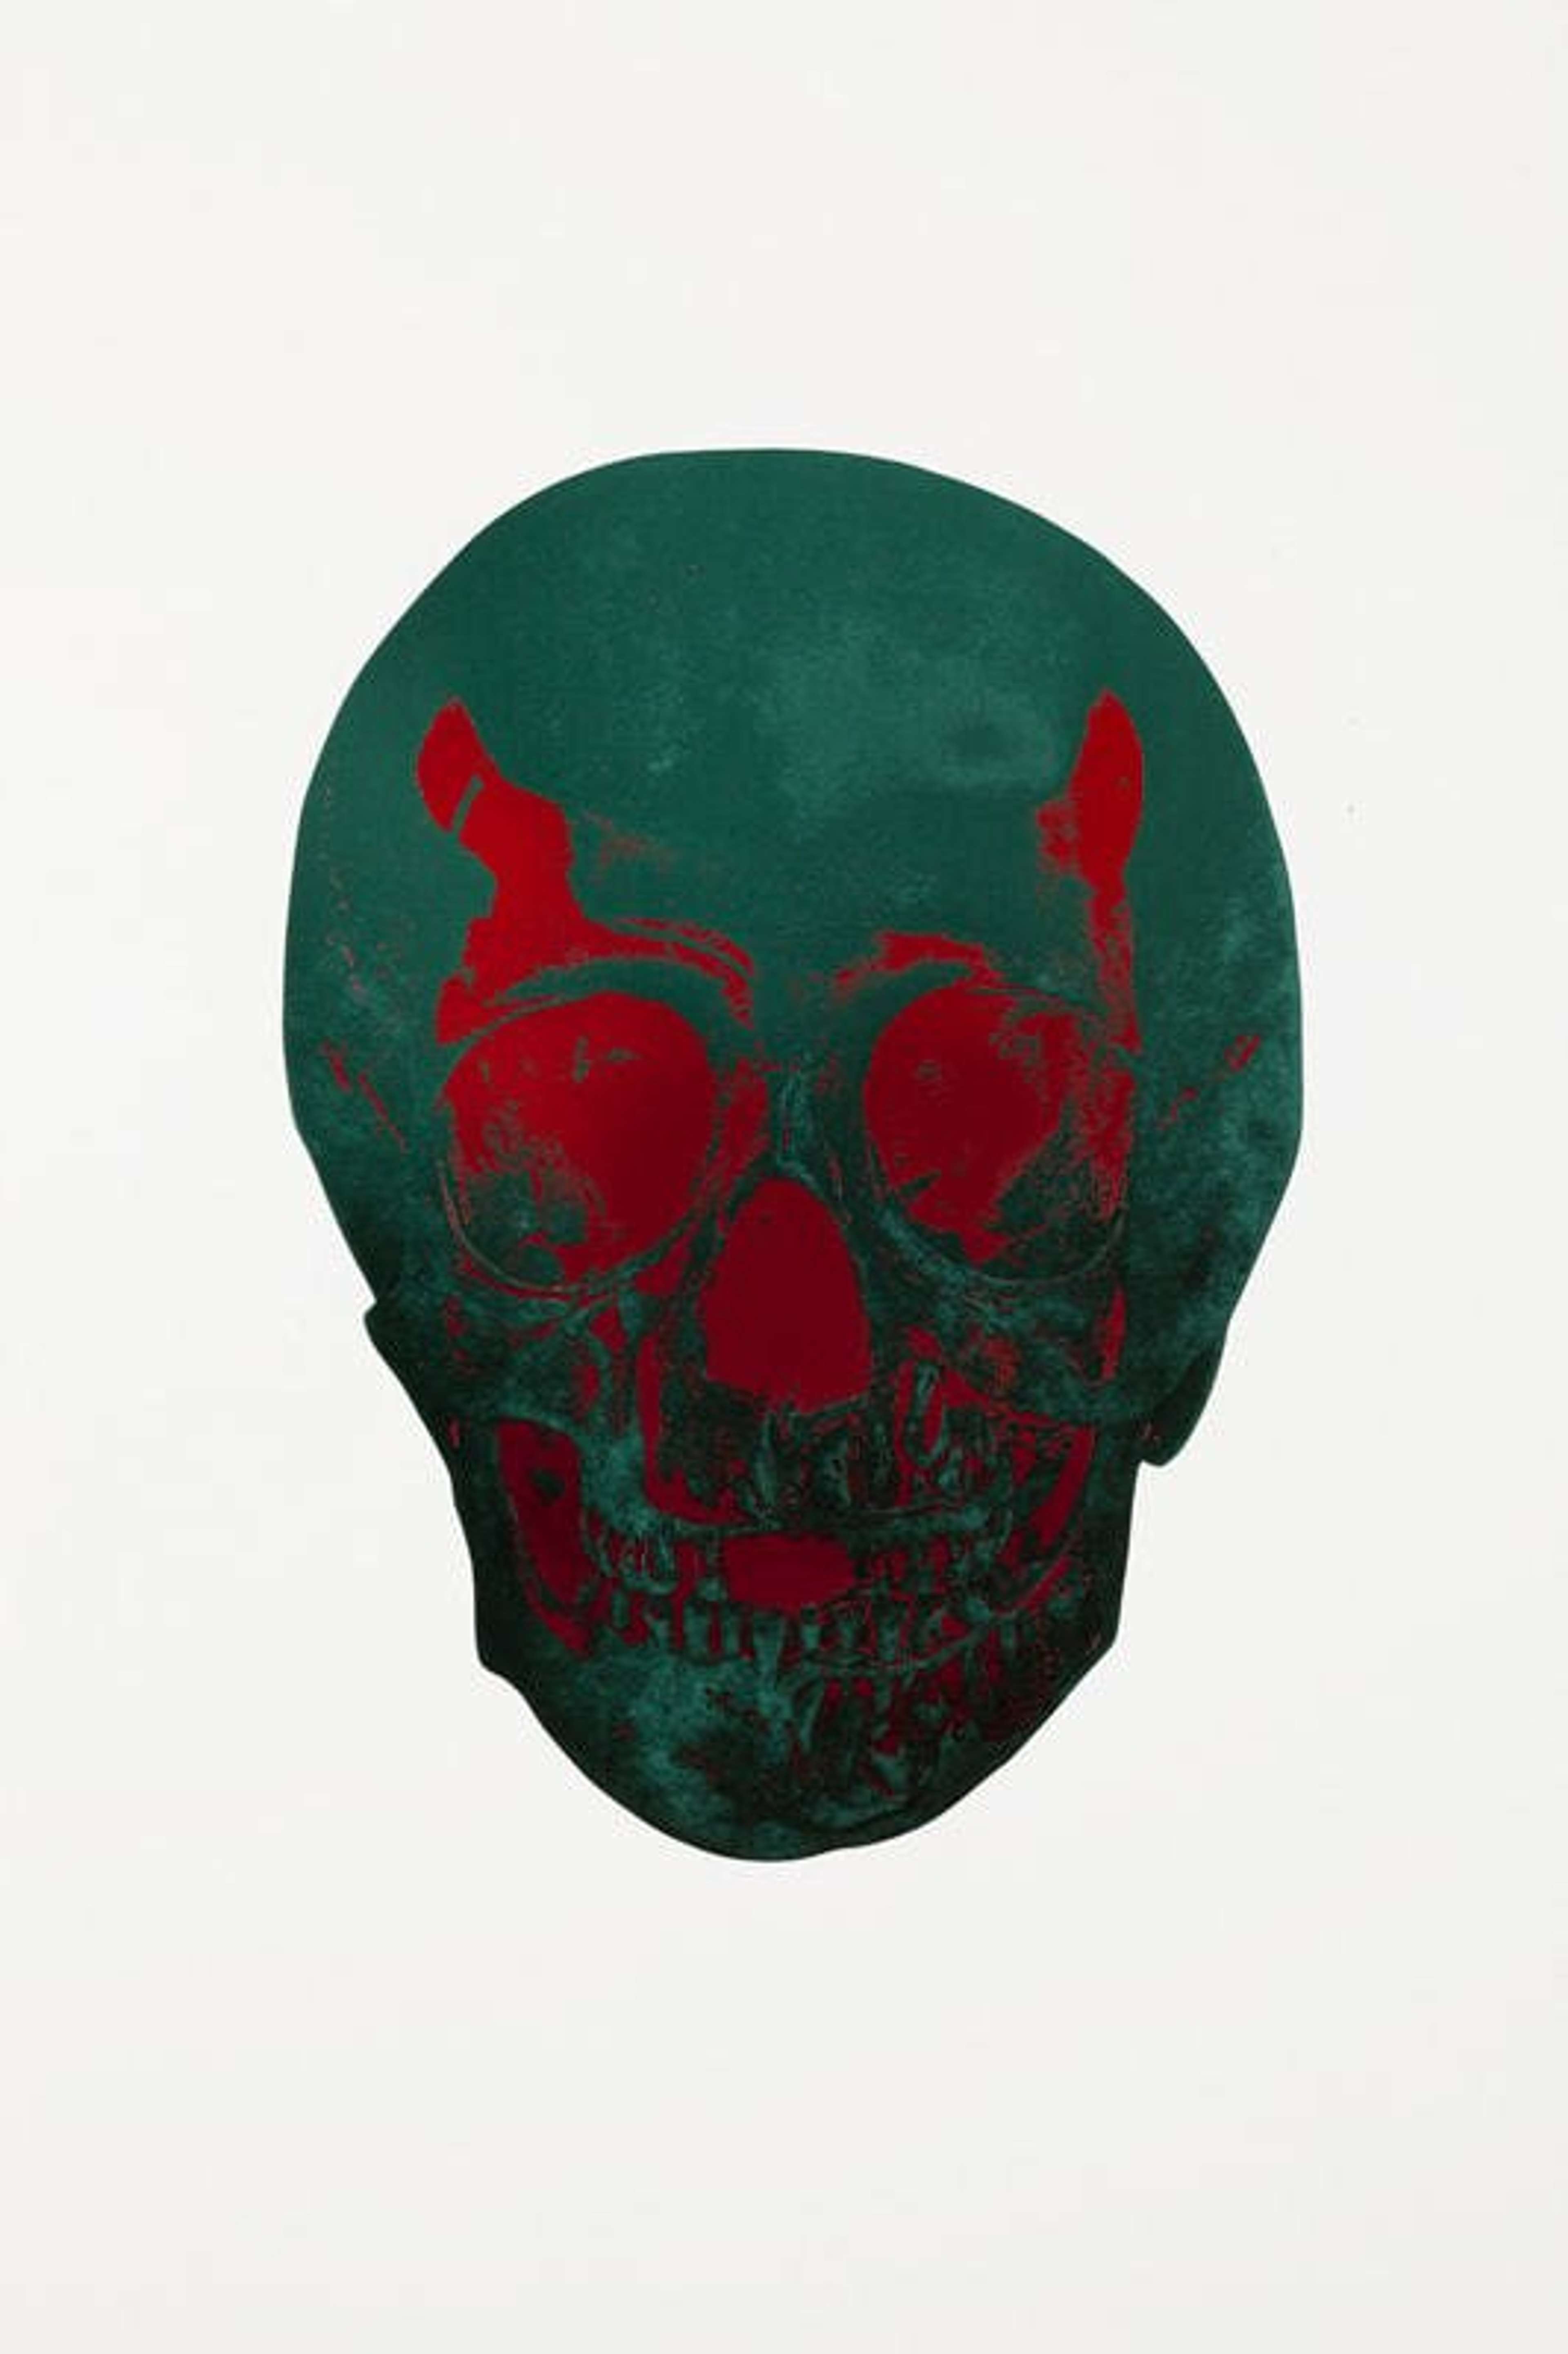 The Dead (racing green, chilli red)